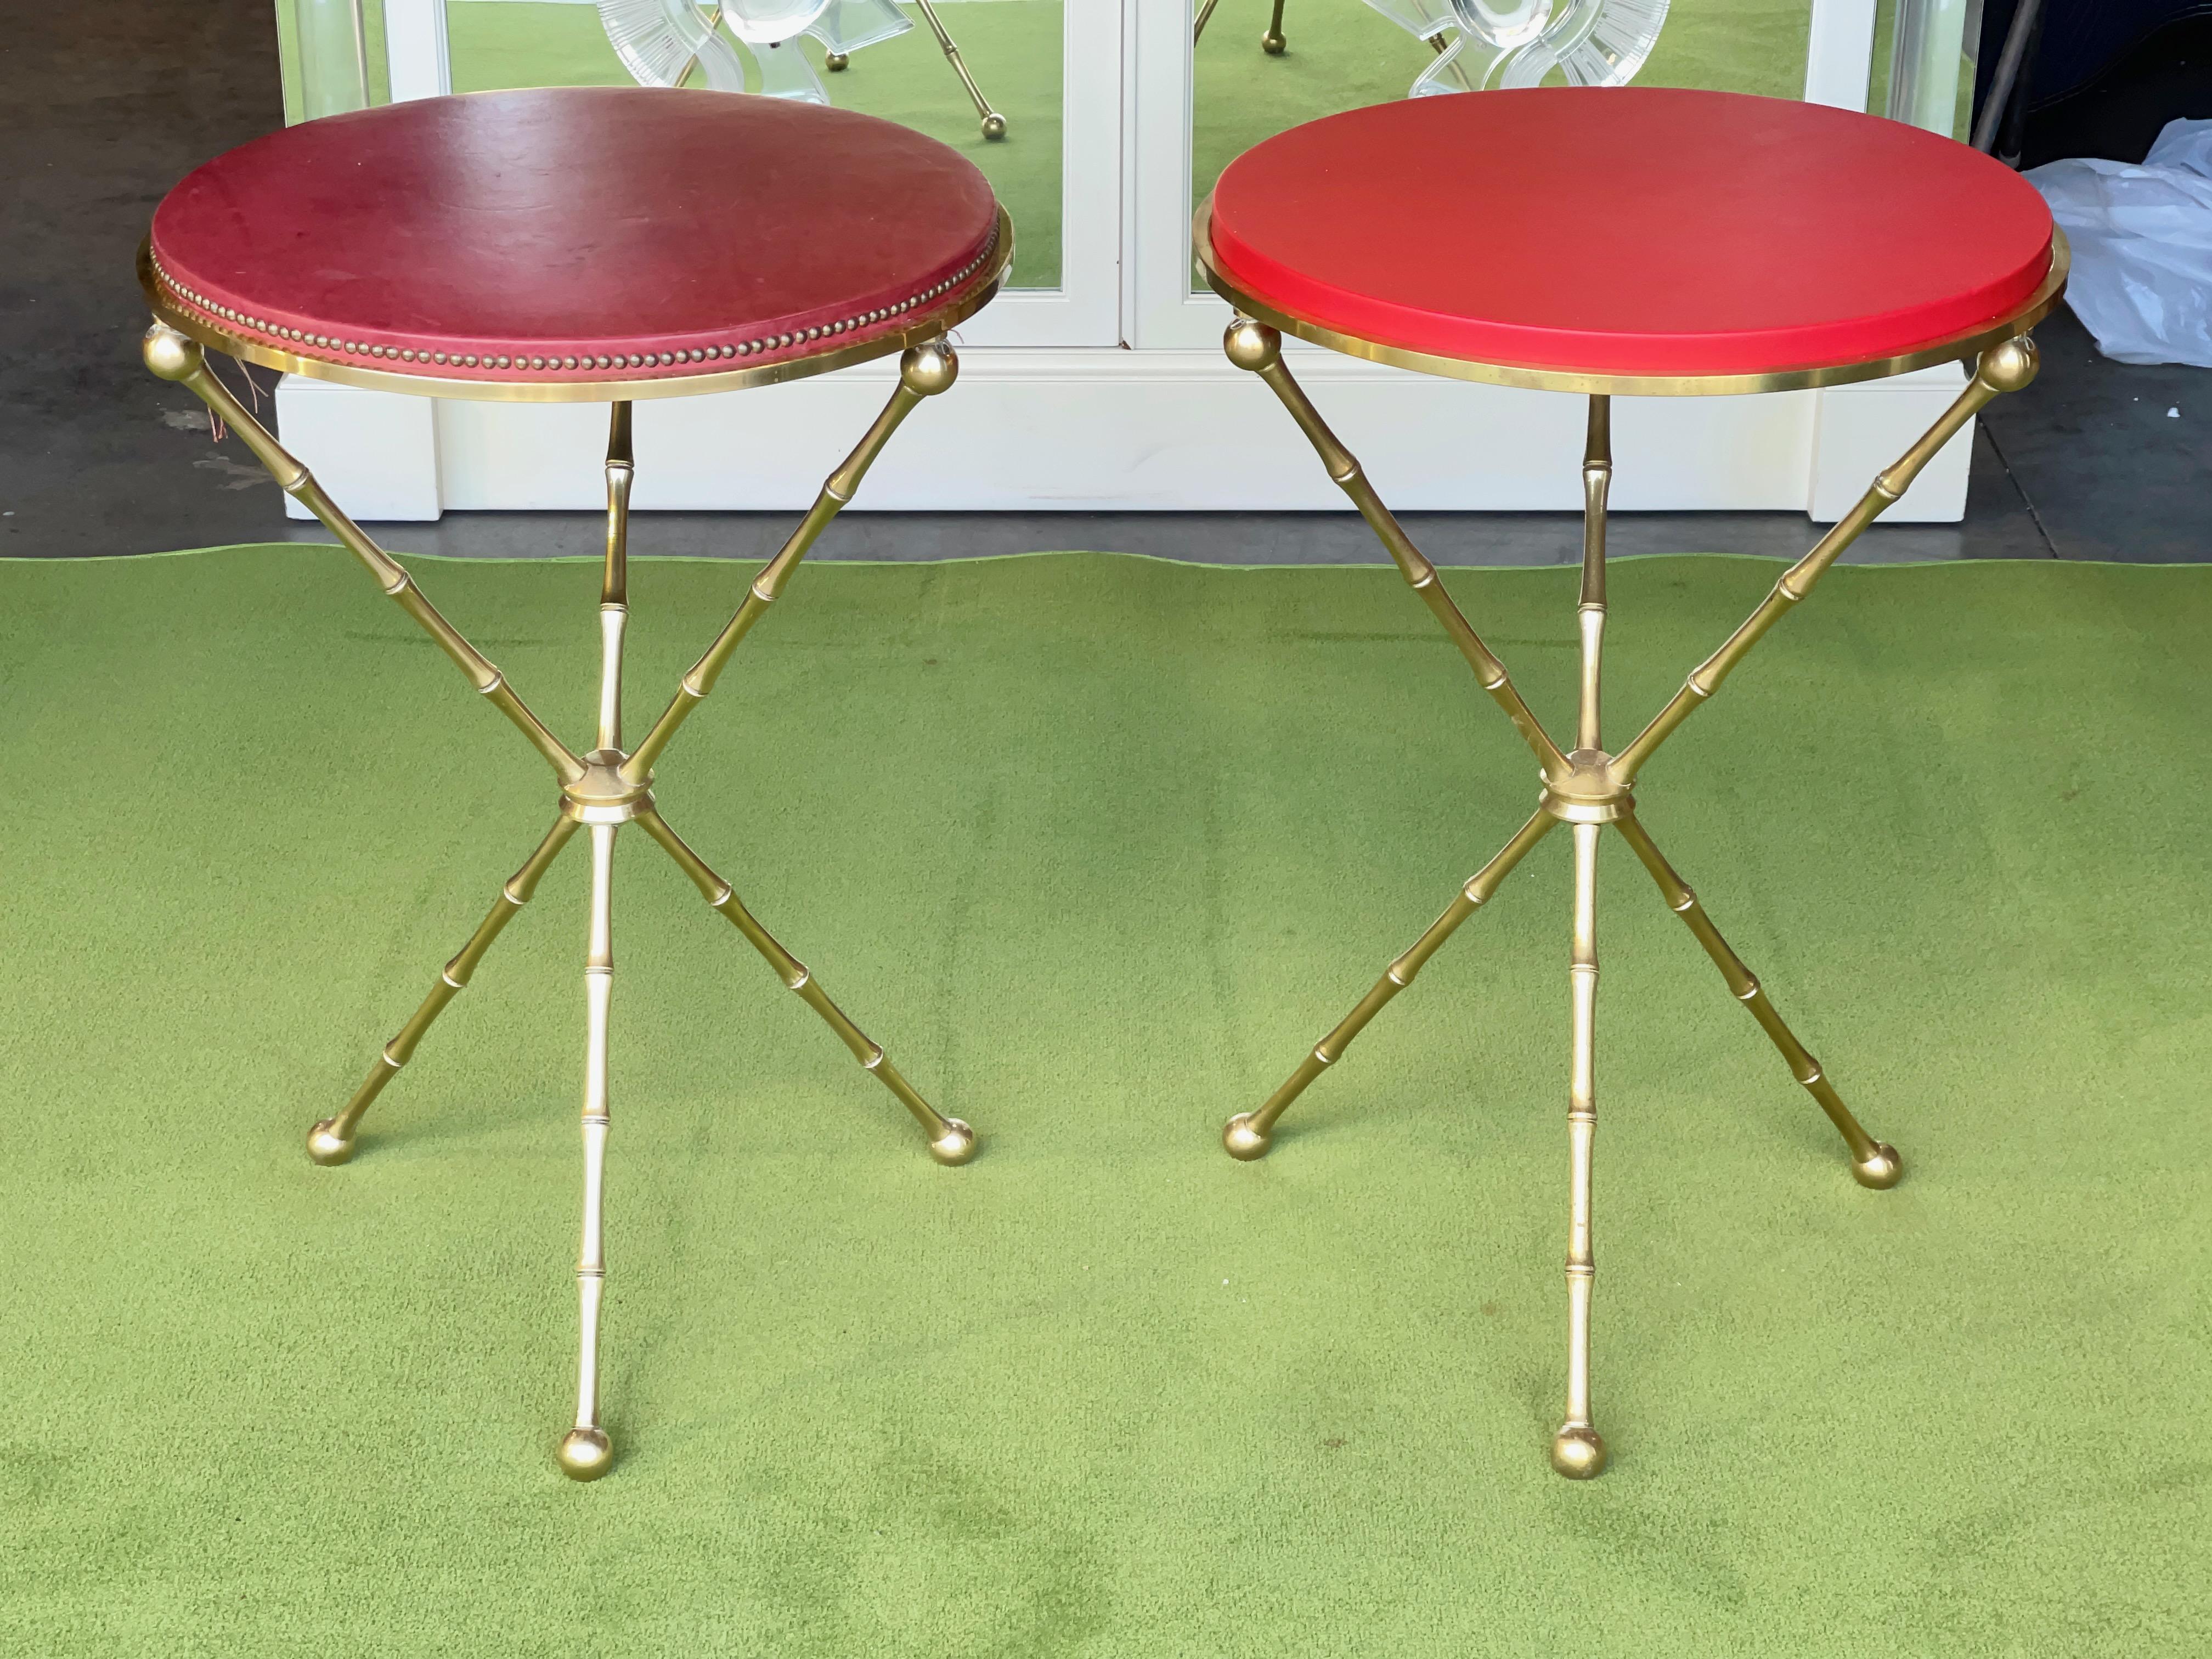 This is the table that launched a thousand imitators. 
Pair of solid brass bamboo-form tripod tables with fixed brass ring into which is inset a leather covered wood top 1.25